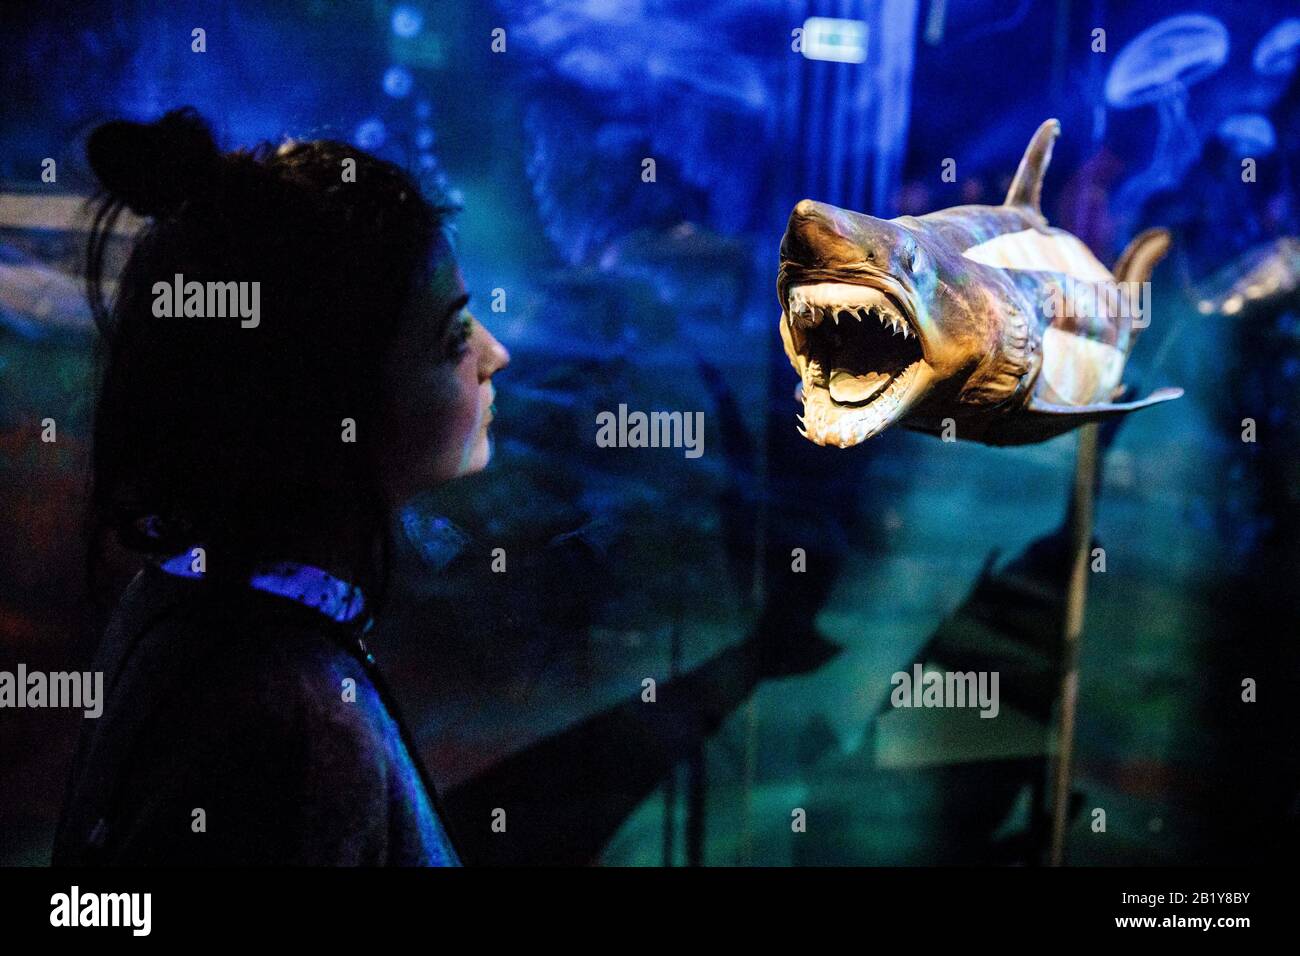 Berlin, Germany. 28th Feb, 2020. A woman looks at an exhibited shark exhibit of the special exhibition of body worlds from the Museum of Man in SEA LIFE. Visitors are shown insights into the anatomy of sea creatures by means of underwater world exhibits. Credit: Carsten Koall/dpa/Alamy Live News Stock Photo